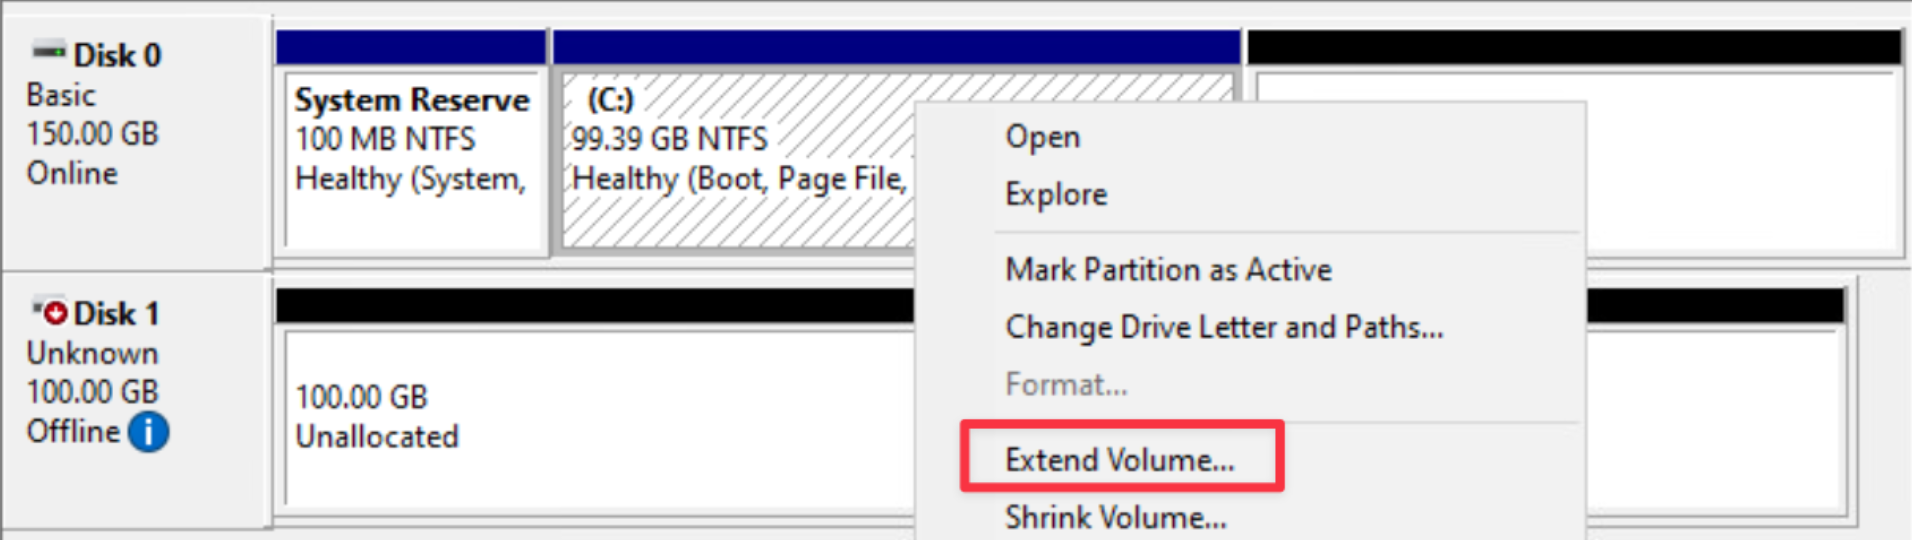 How can I use DiskPart to extend a volume?  ITPro Today: IT News, How-Tos,  Trends, Case Studies, Career Tips, More